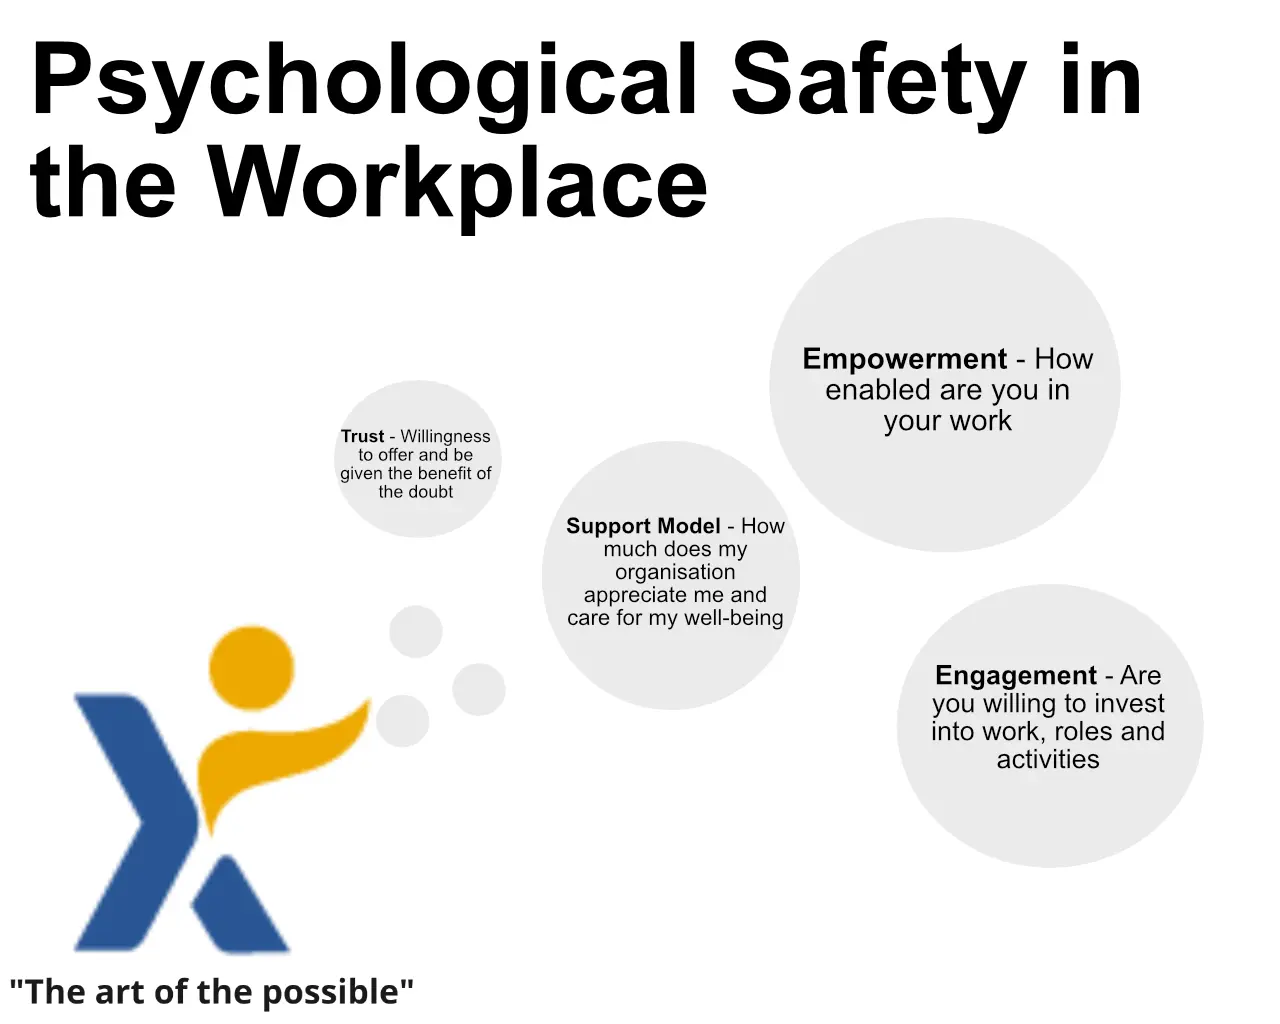 Psychological Safety in the Workplace image